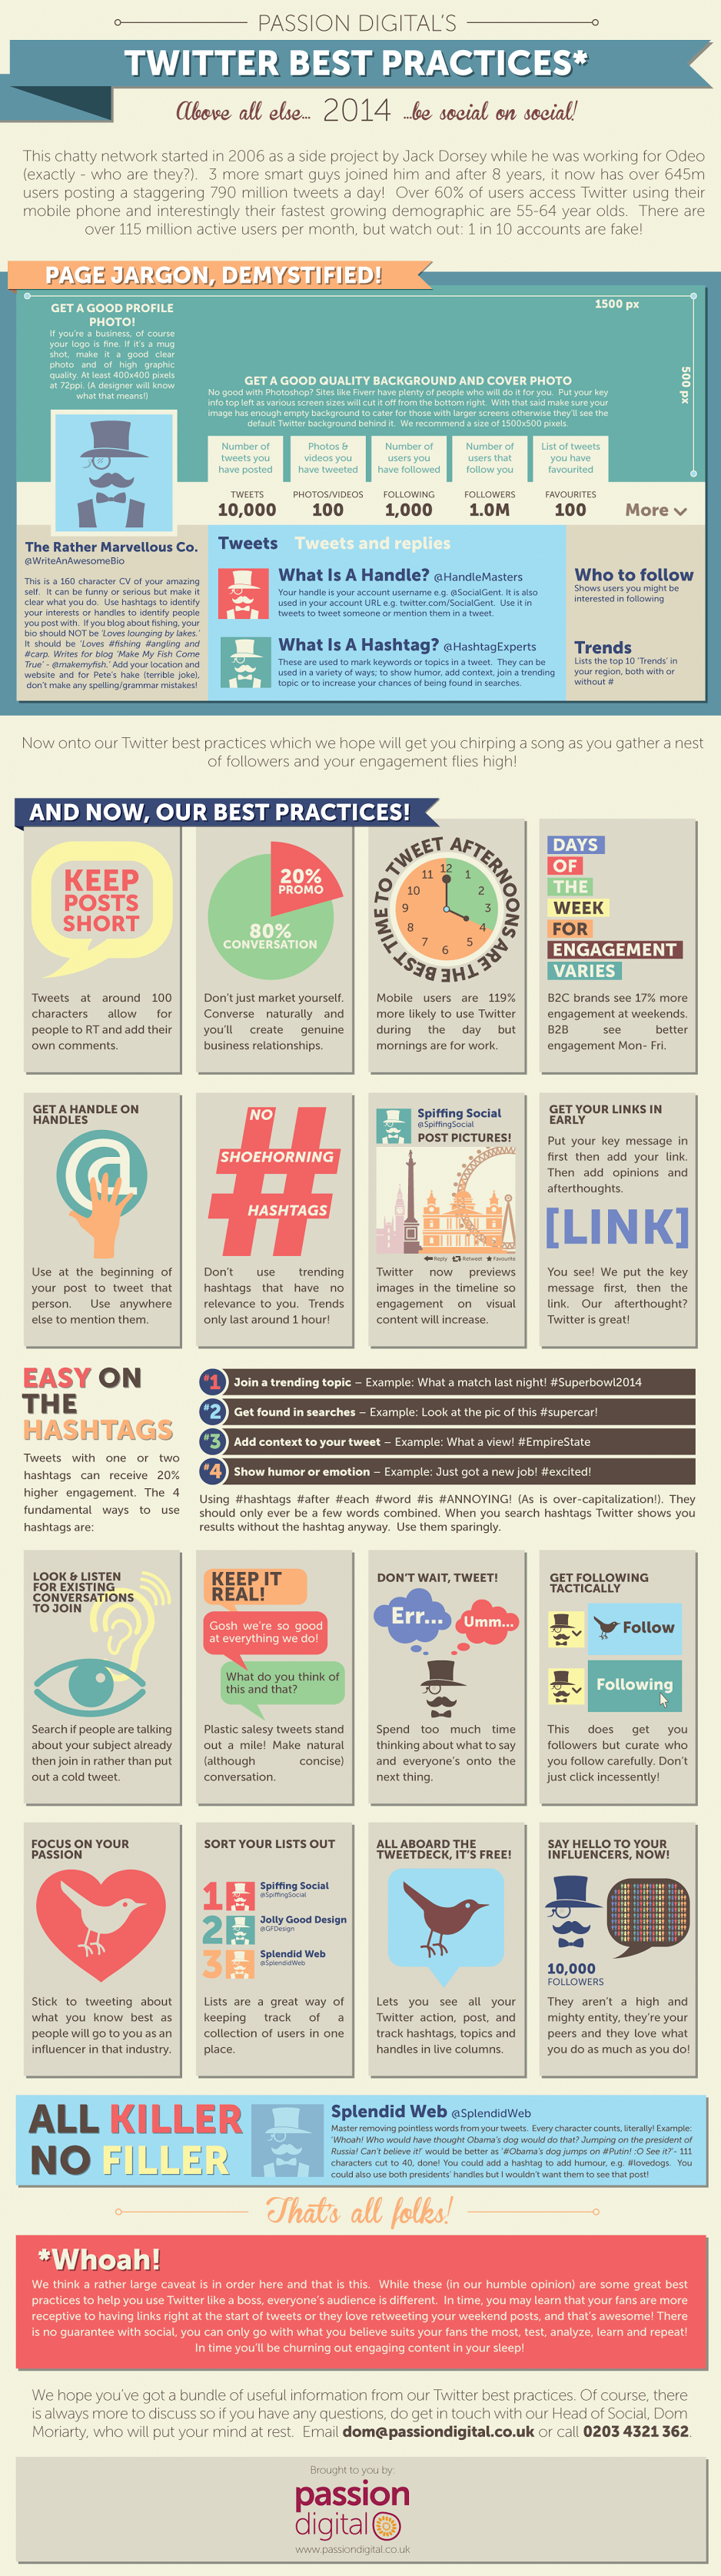 23 Rather Practical Twitter Best Practices for Businesses 2014 - infographic